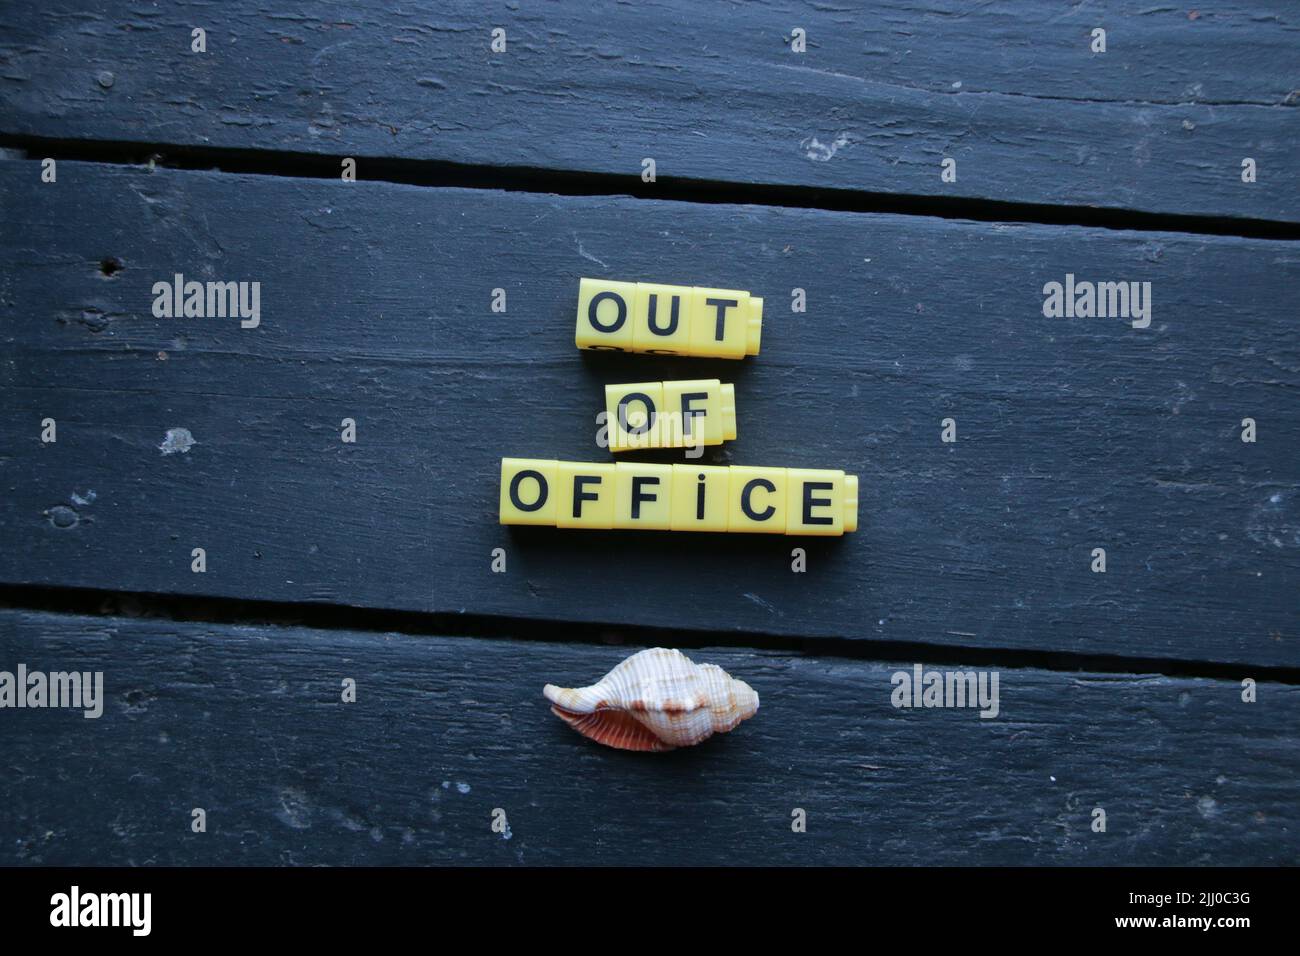 out of office creative concept Stock Photo